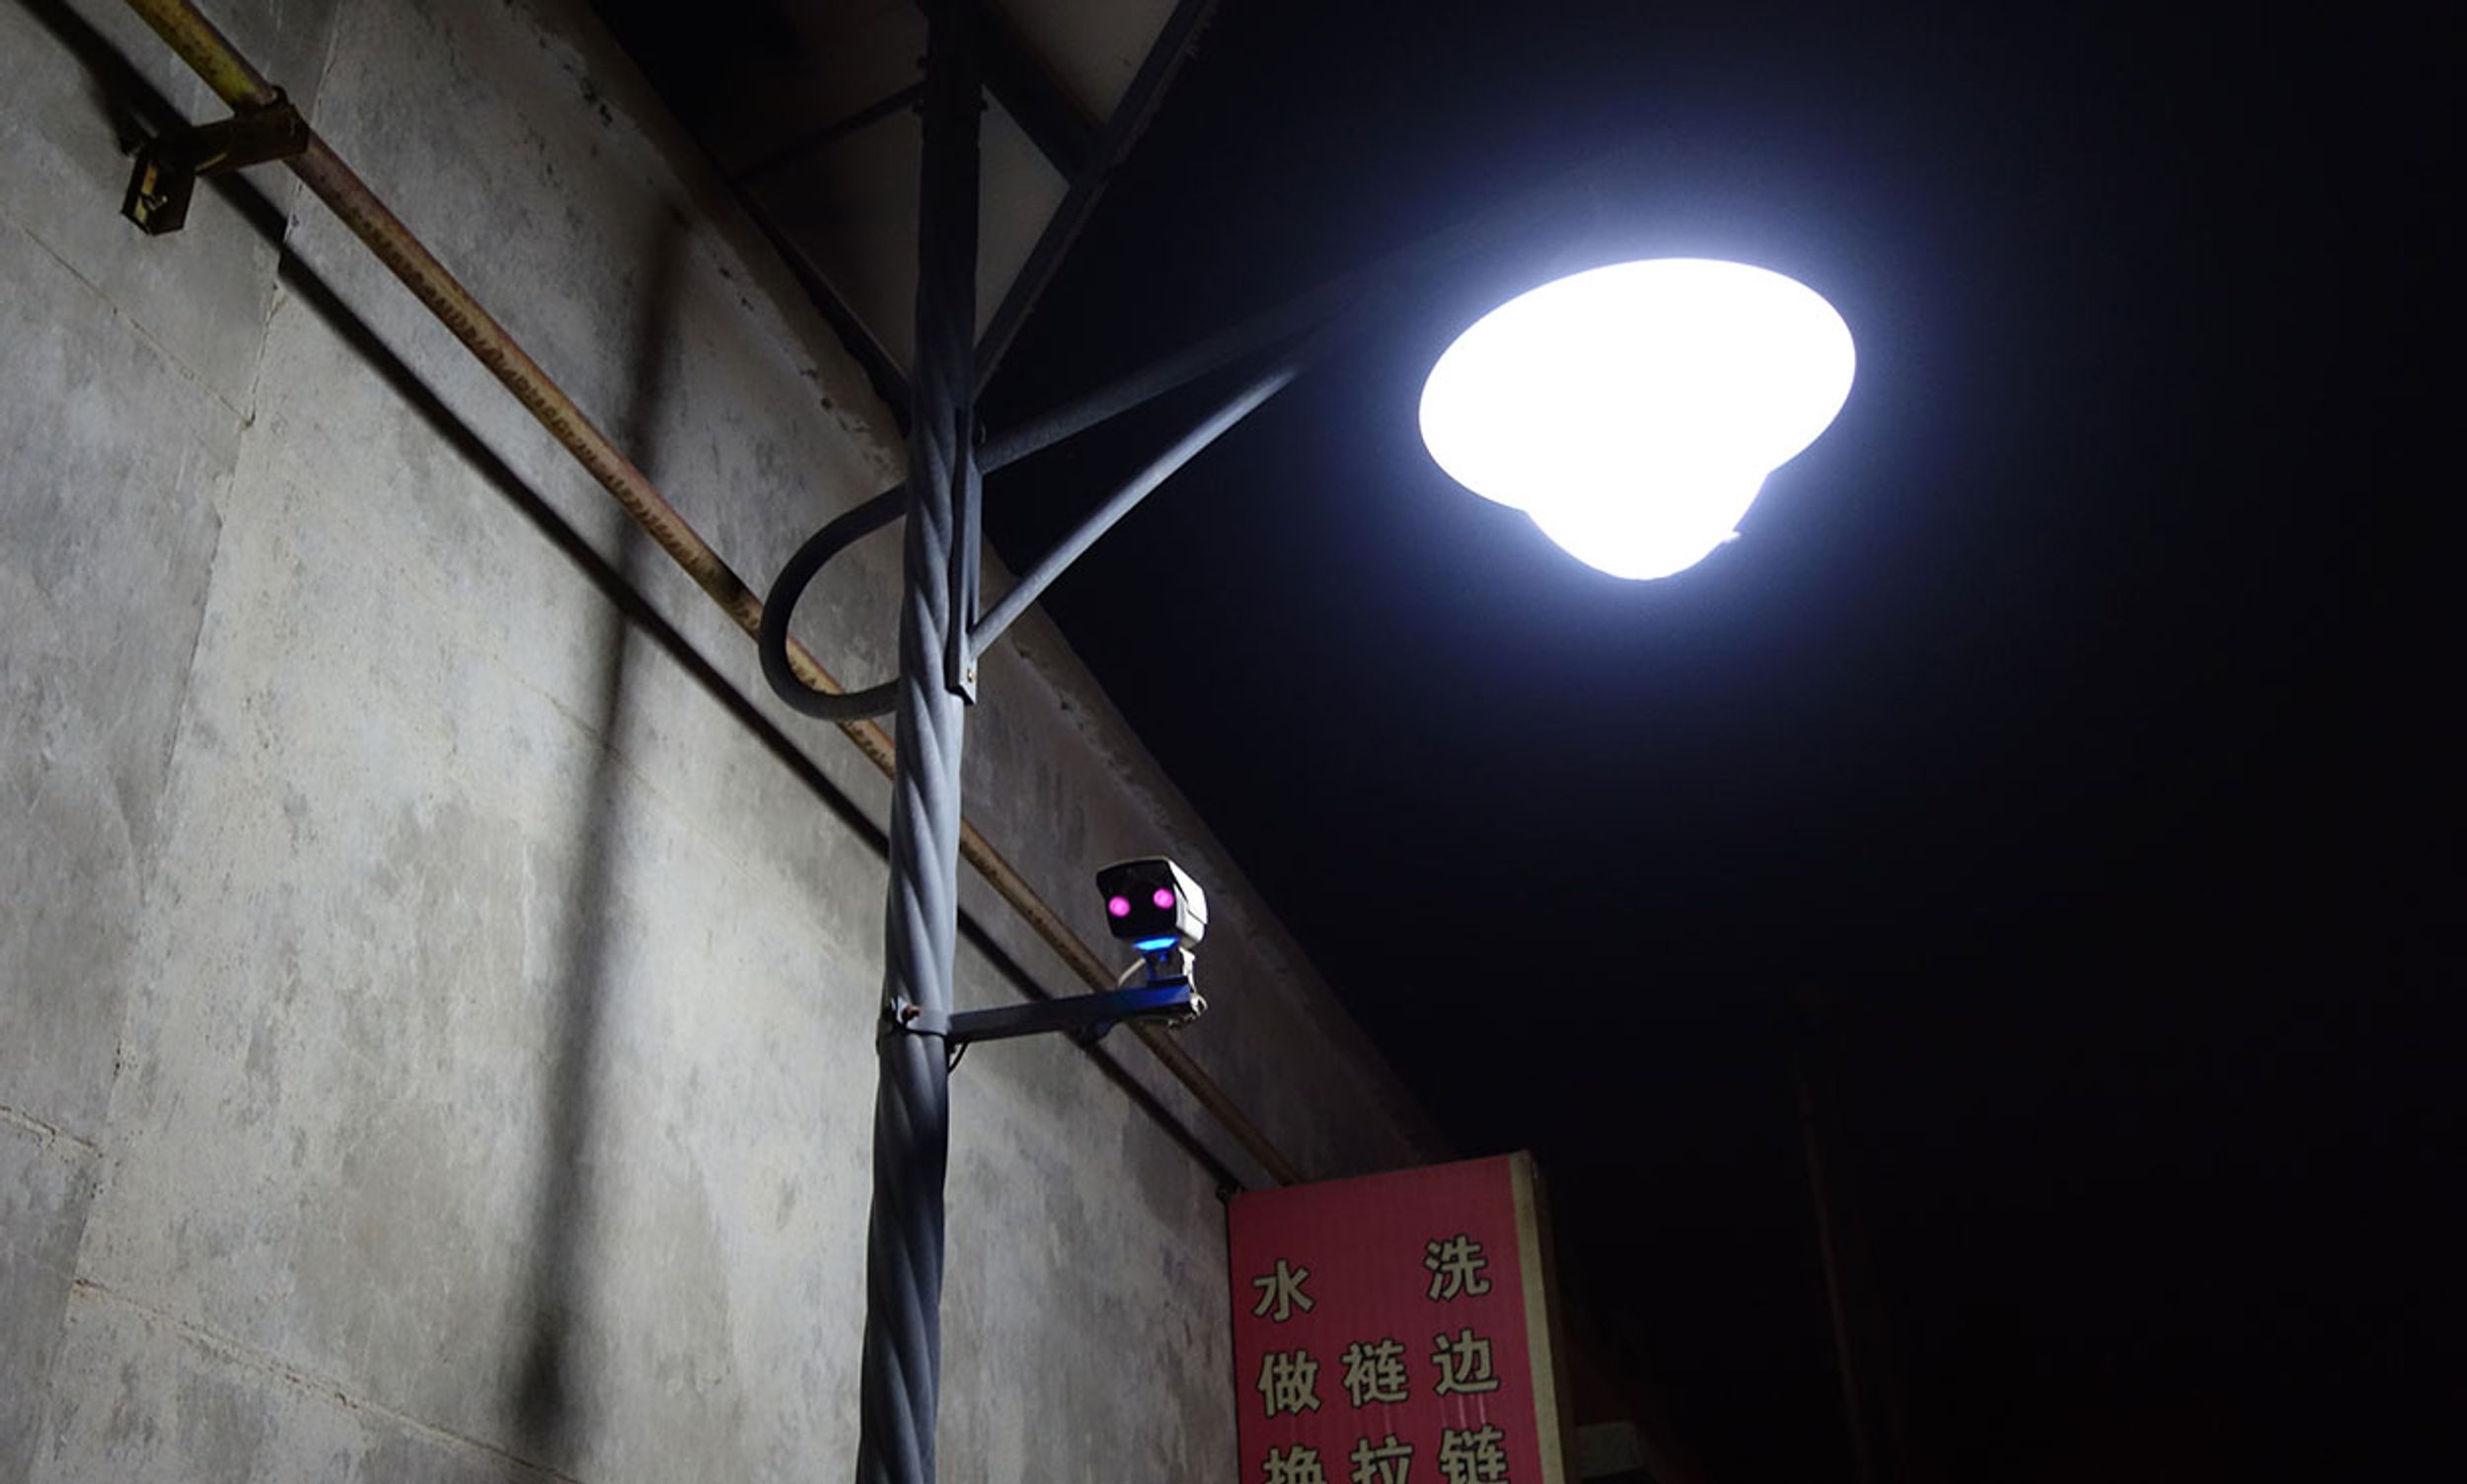 Surveillance camera in a small alley in Dunhuang, in China's Gansu province.